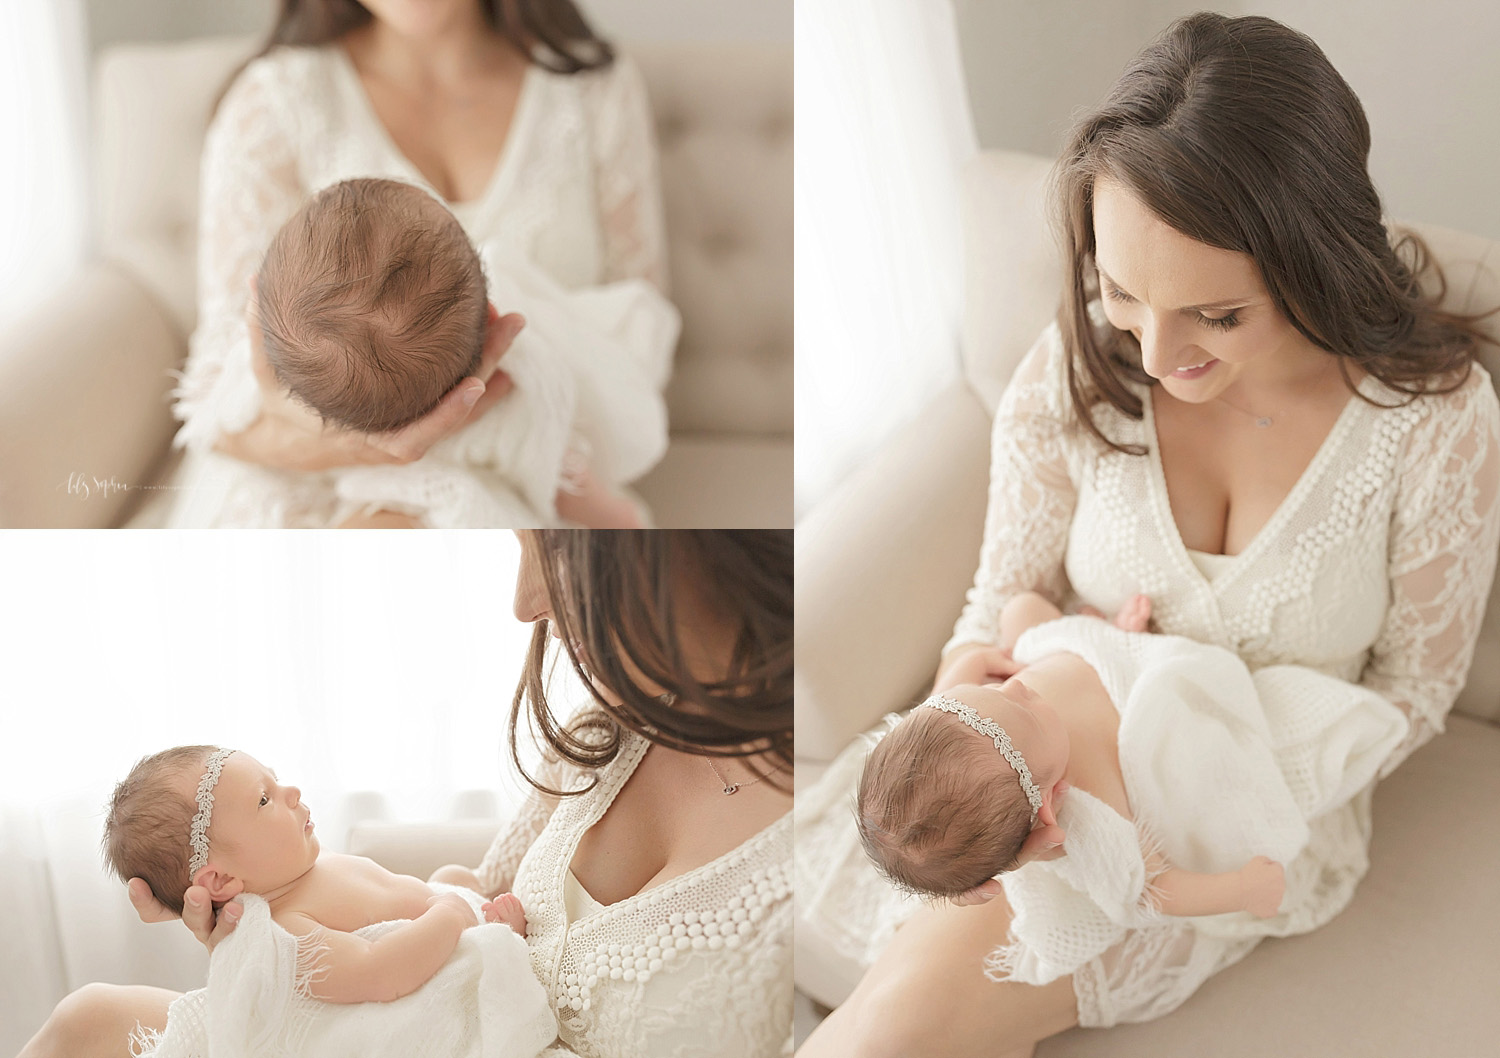  Image collage of a mother, wearing a lace dress, holding her newborn, baby, daughter.&nbsp; 